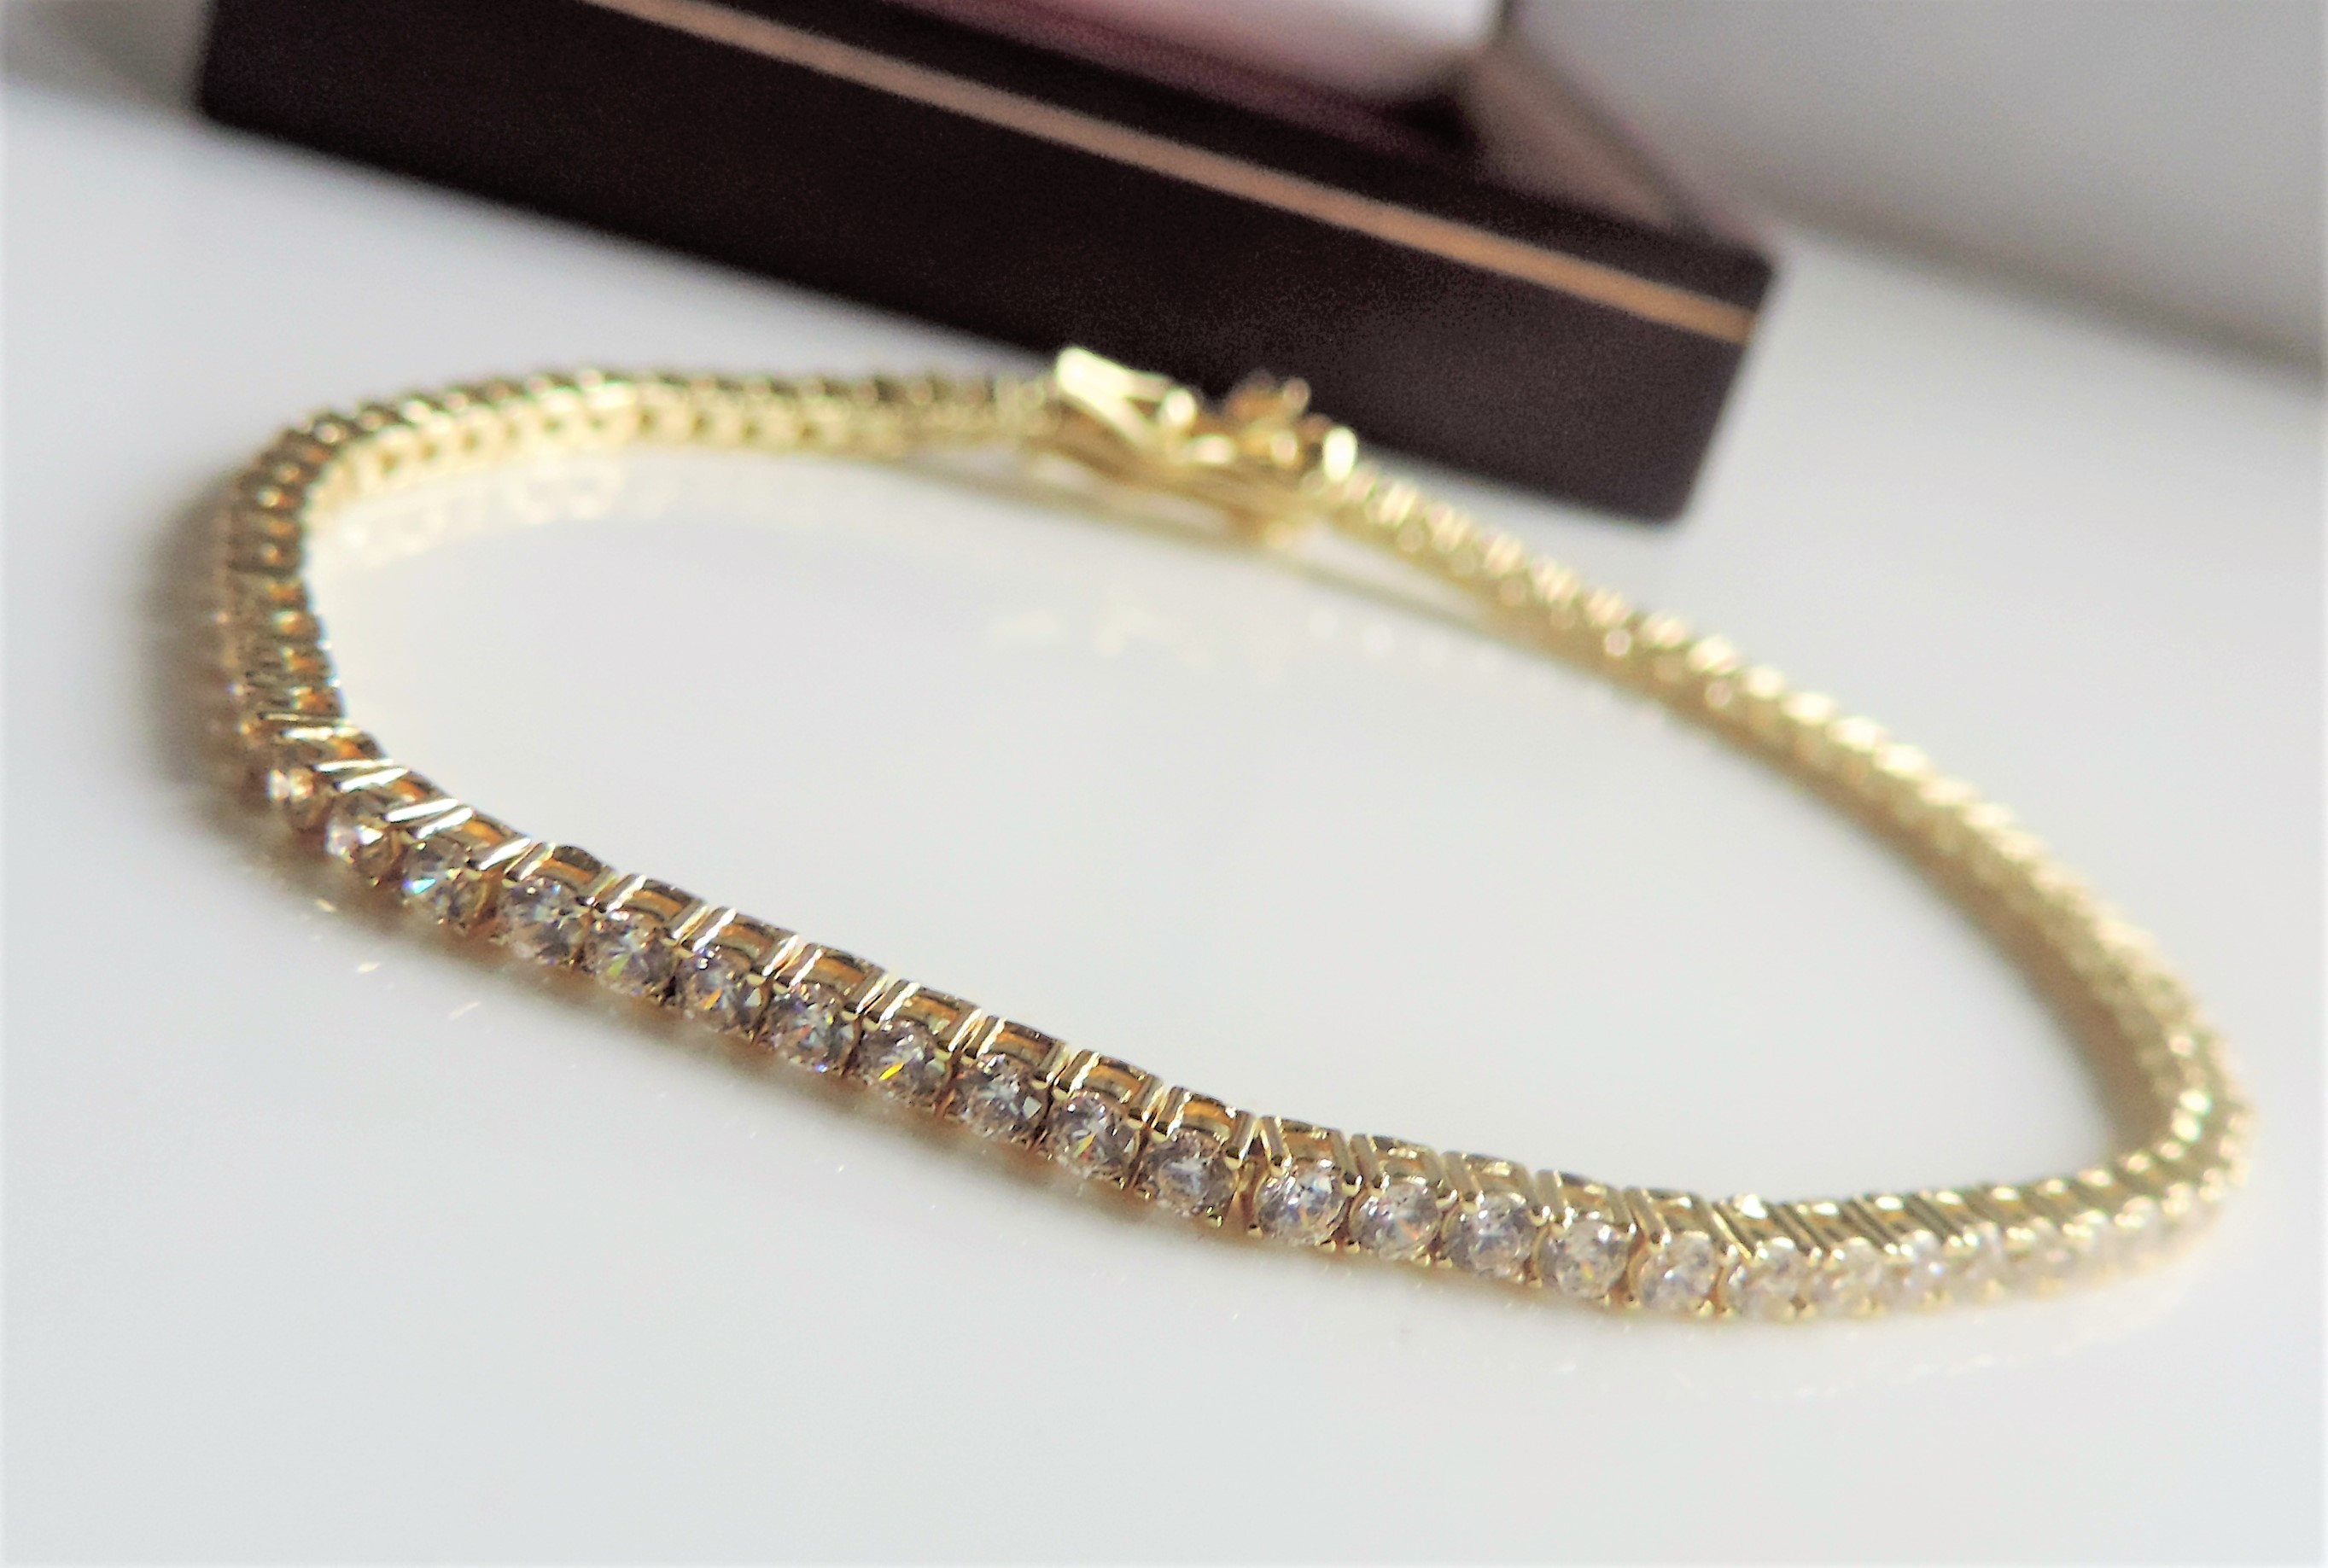 Gold on Sterling Silver Tennis Bracelet 'New' with Gift Pouch - Image 4 of 4